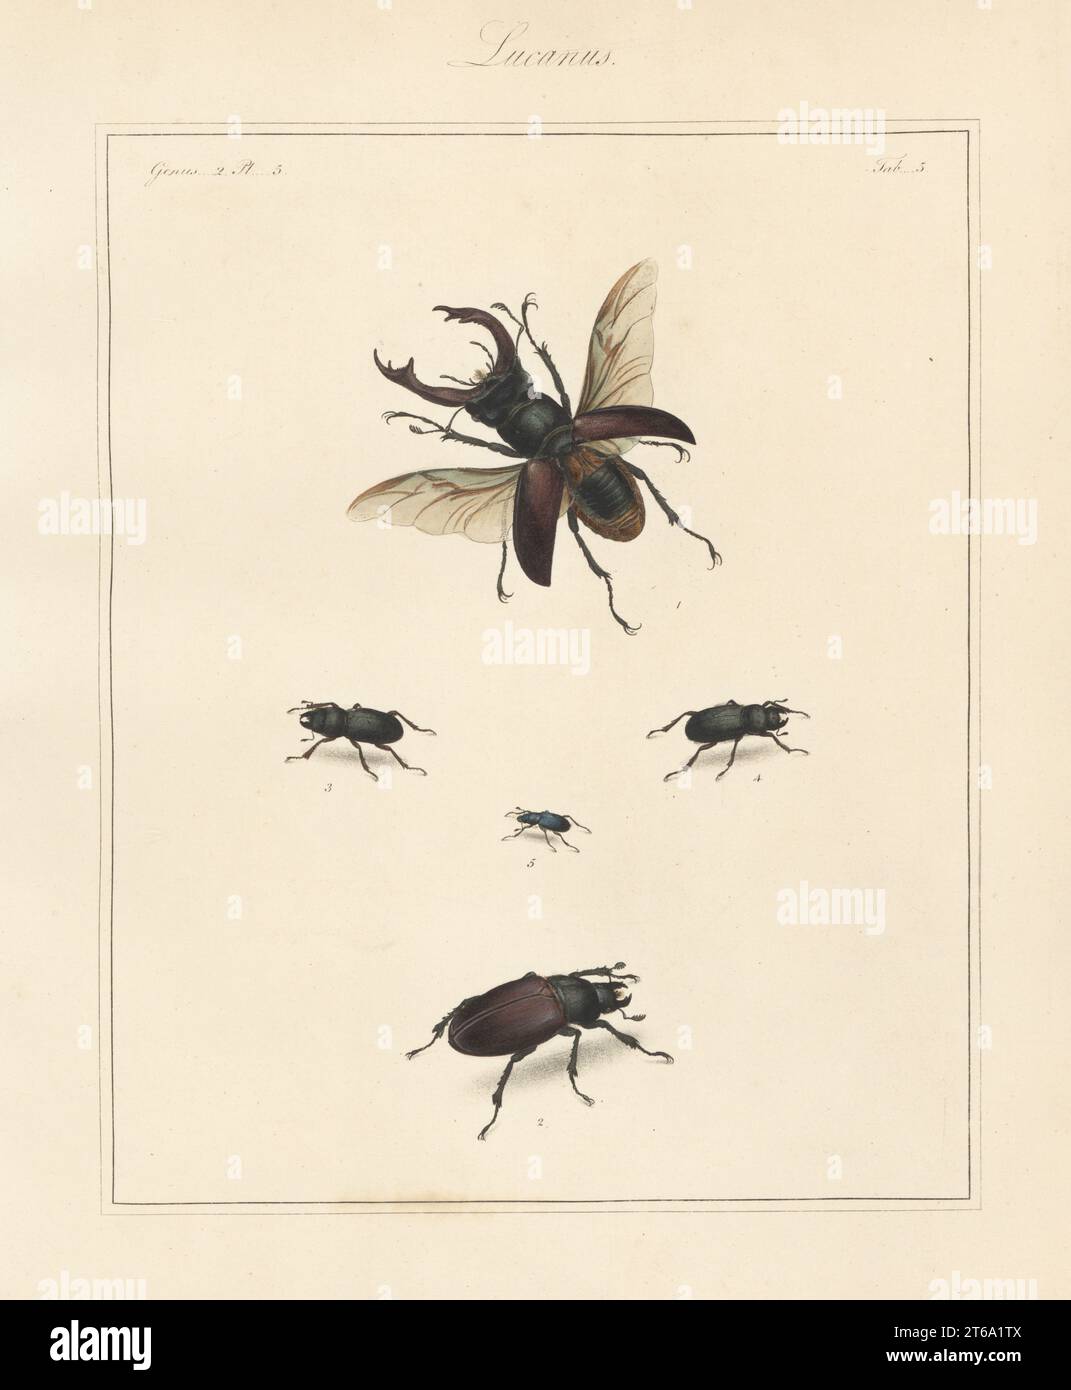 Greater stag beetle, Lucanus cervus 1,2, lesser stag beetle, Dorcus parallelipipedus 3, 4, and stag beetle, Platycerus caraboides 5. Handcoloured copperplate engraving from Thomas Martyns The English Entomologist, Exhibiting all the Coleopterous Insects found in England, Academy for Illustrating and Painting Natural History, London, 1792. Stock Photo